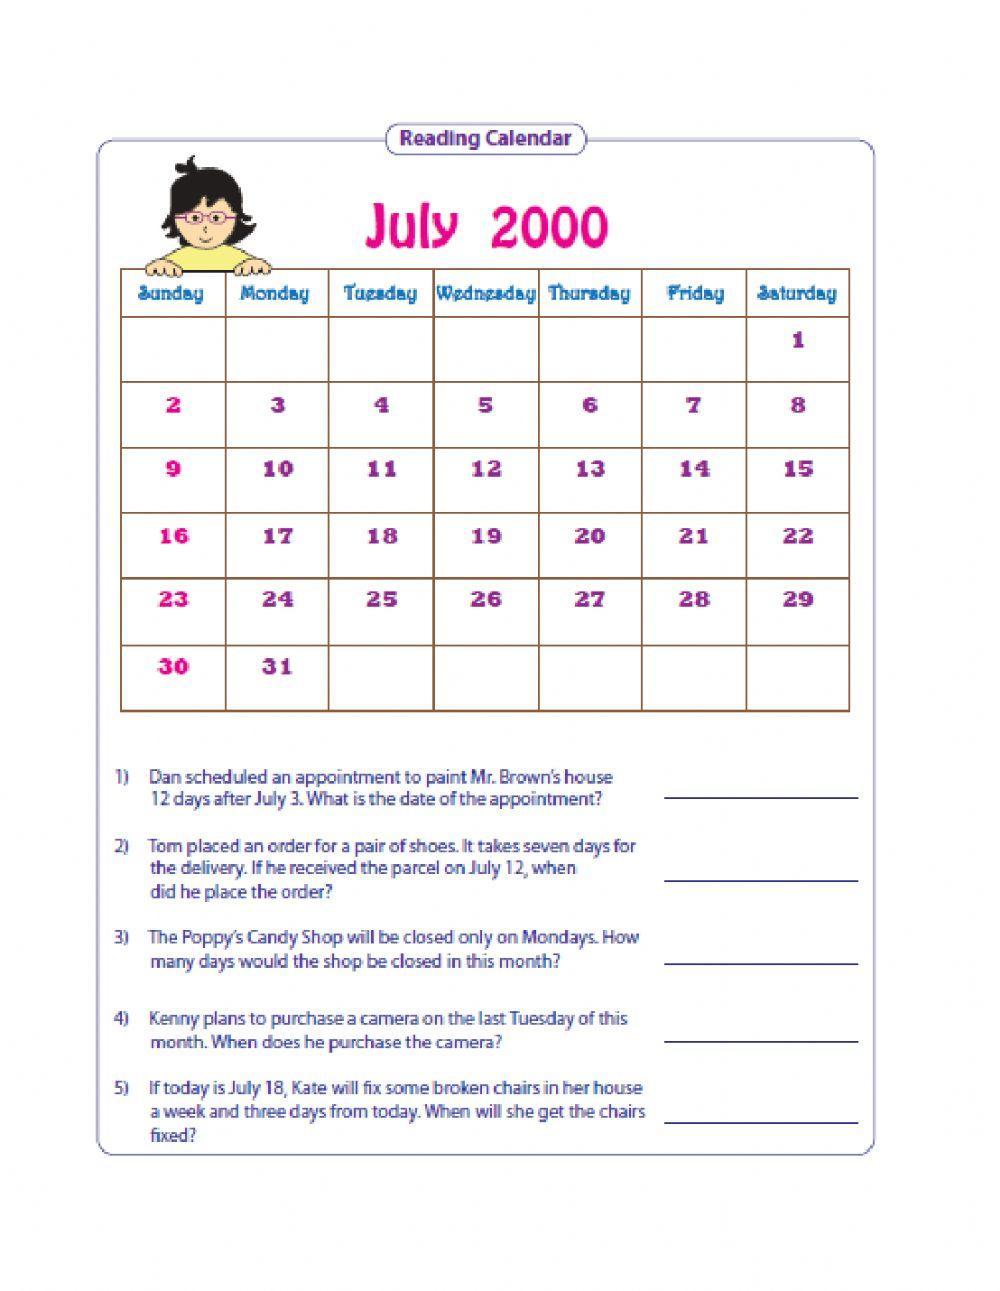 Reading Simple Timetables and Using Calendars